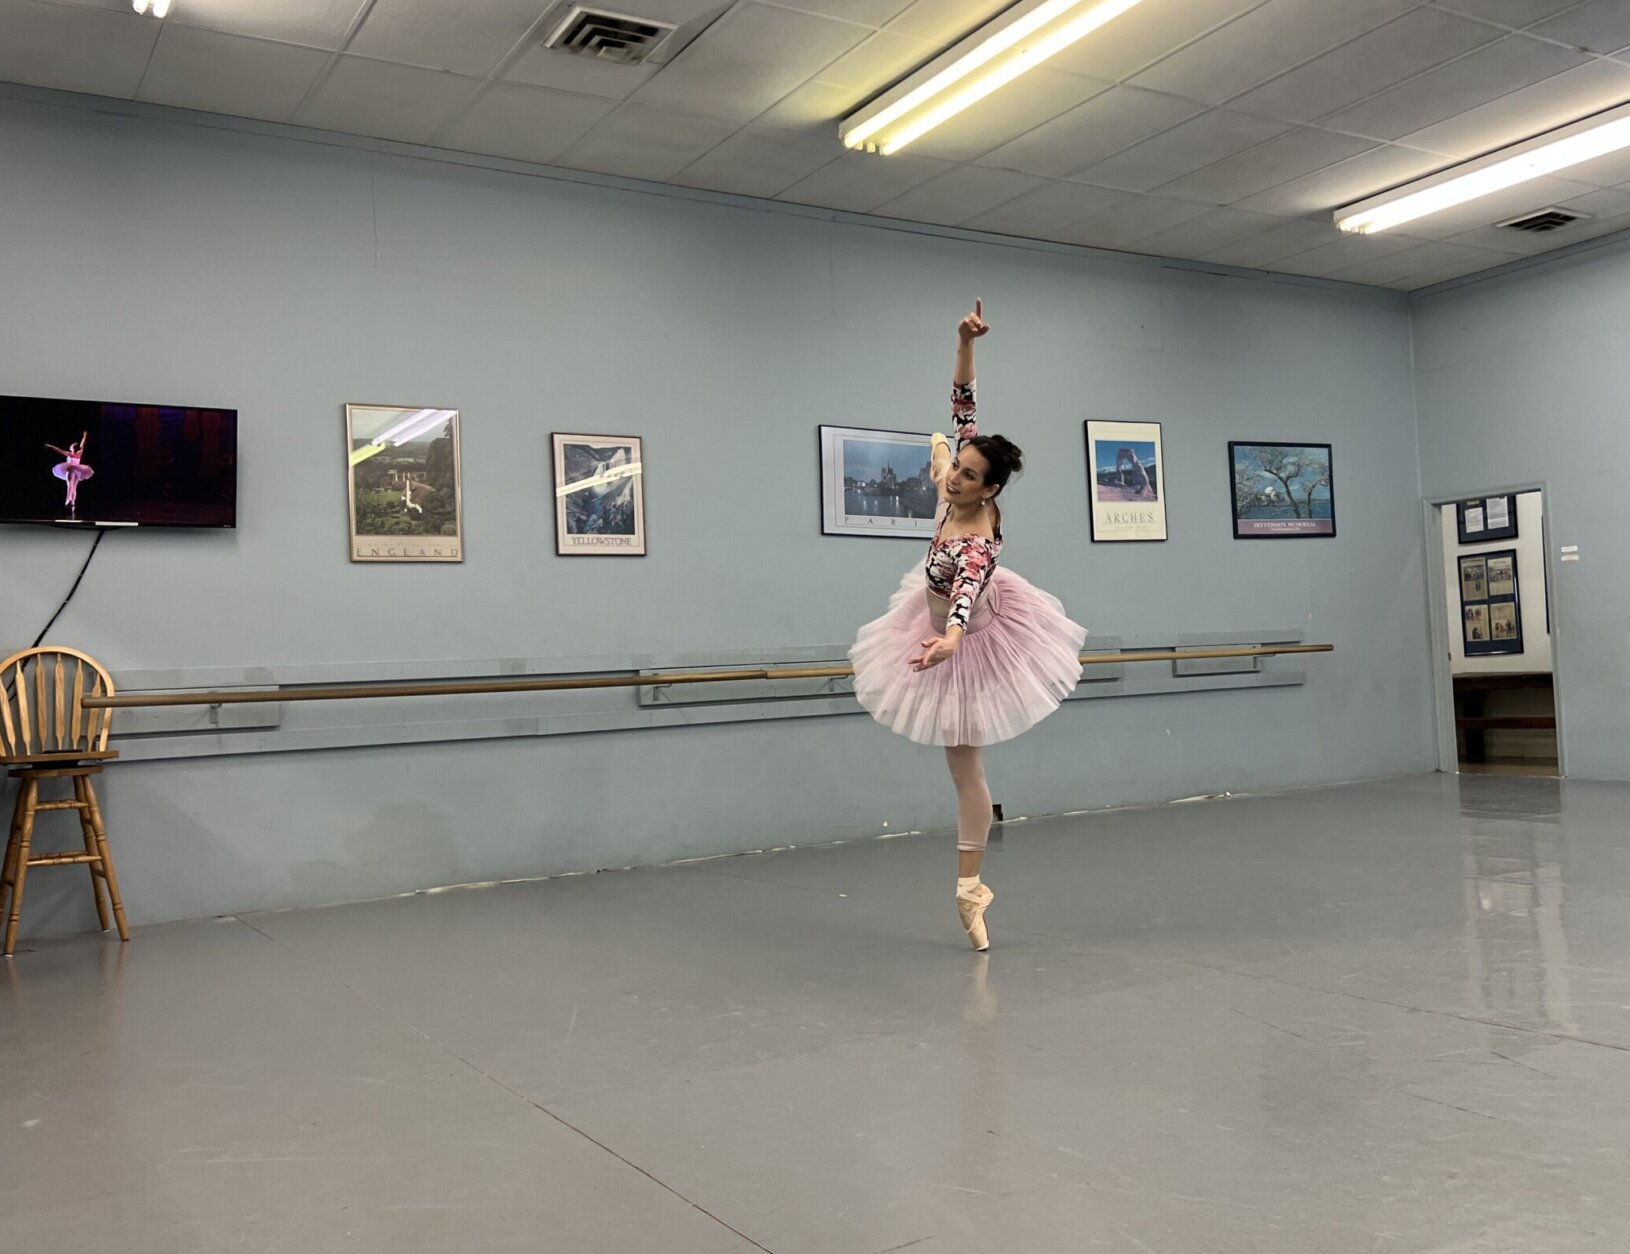 Moya performs a solo and stretches her leg toward the ceiling while balancing squarely on pointe.